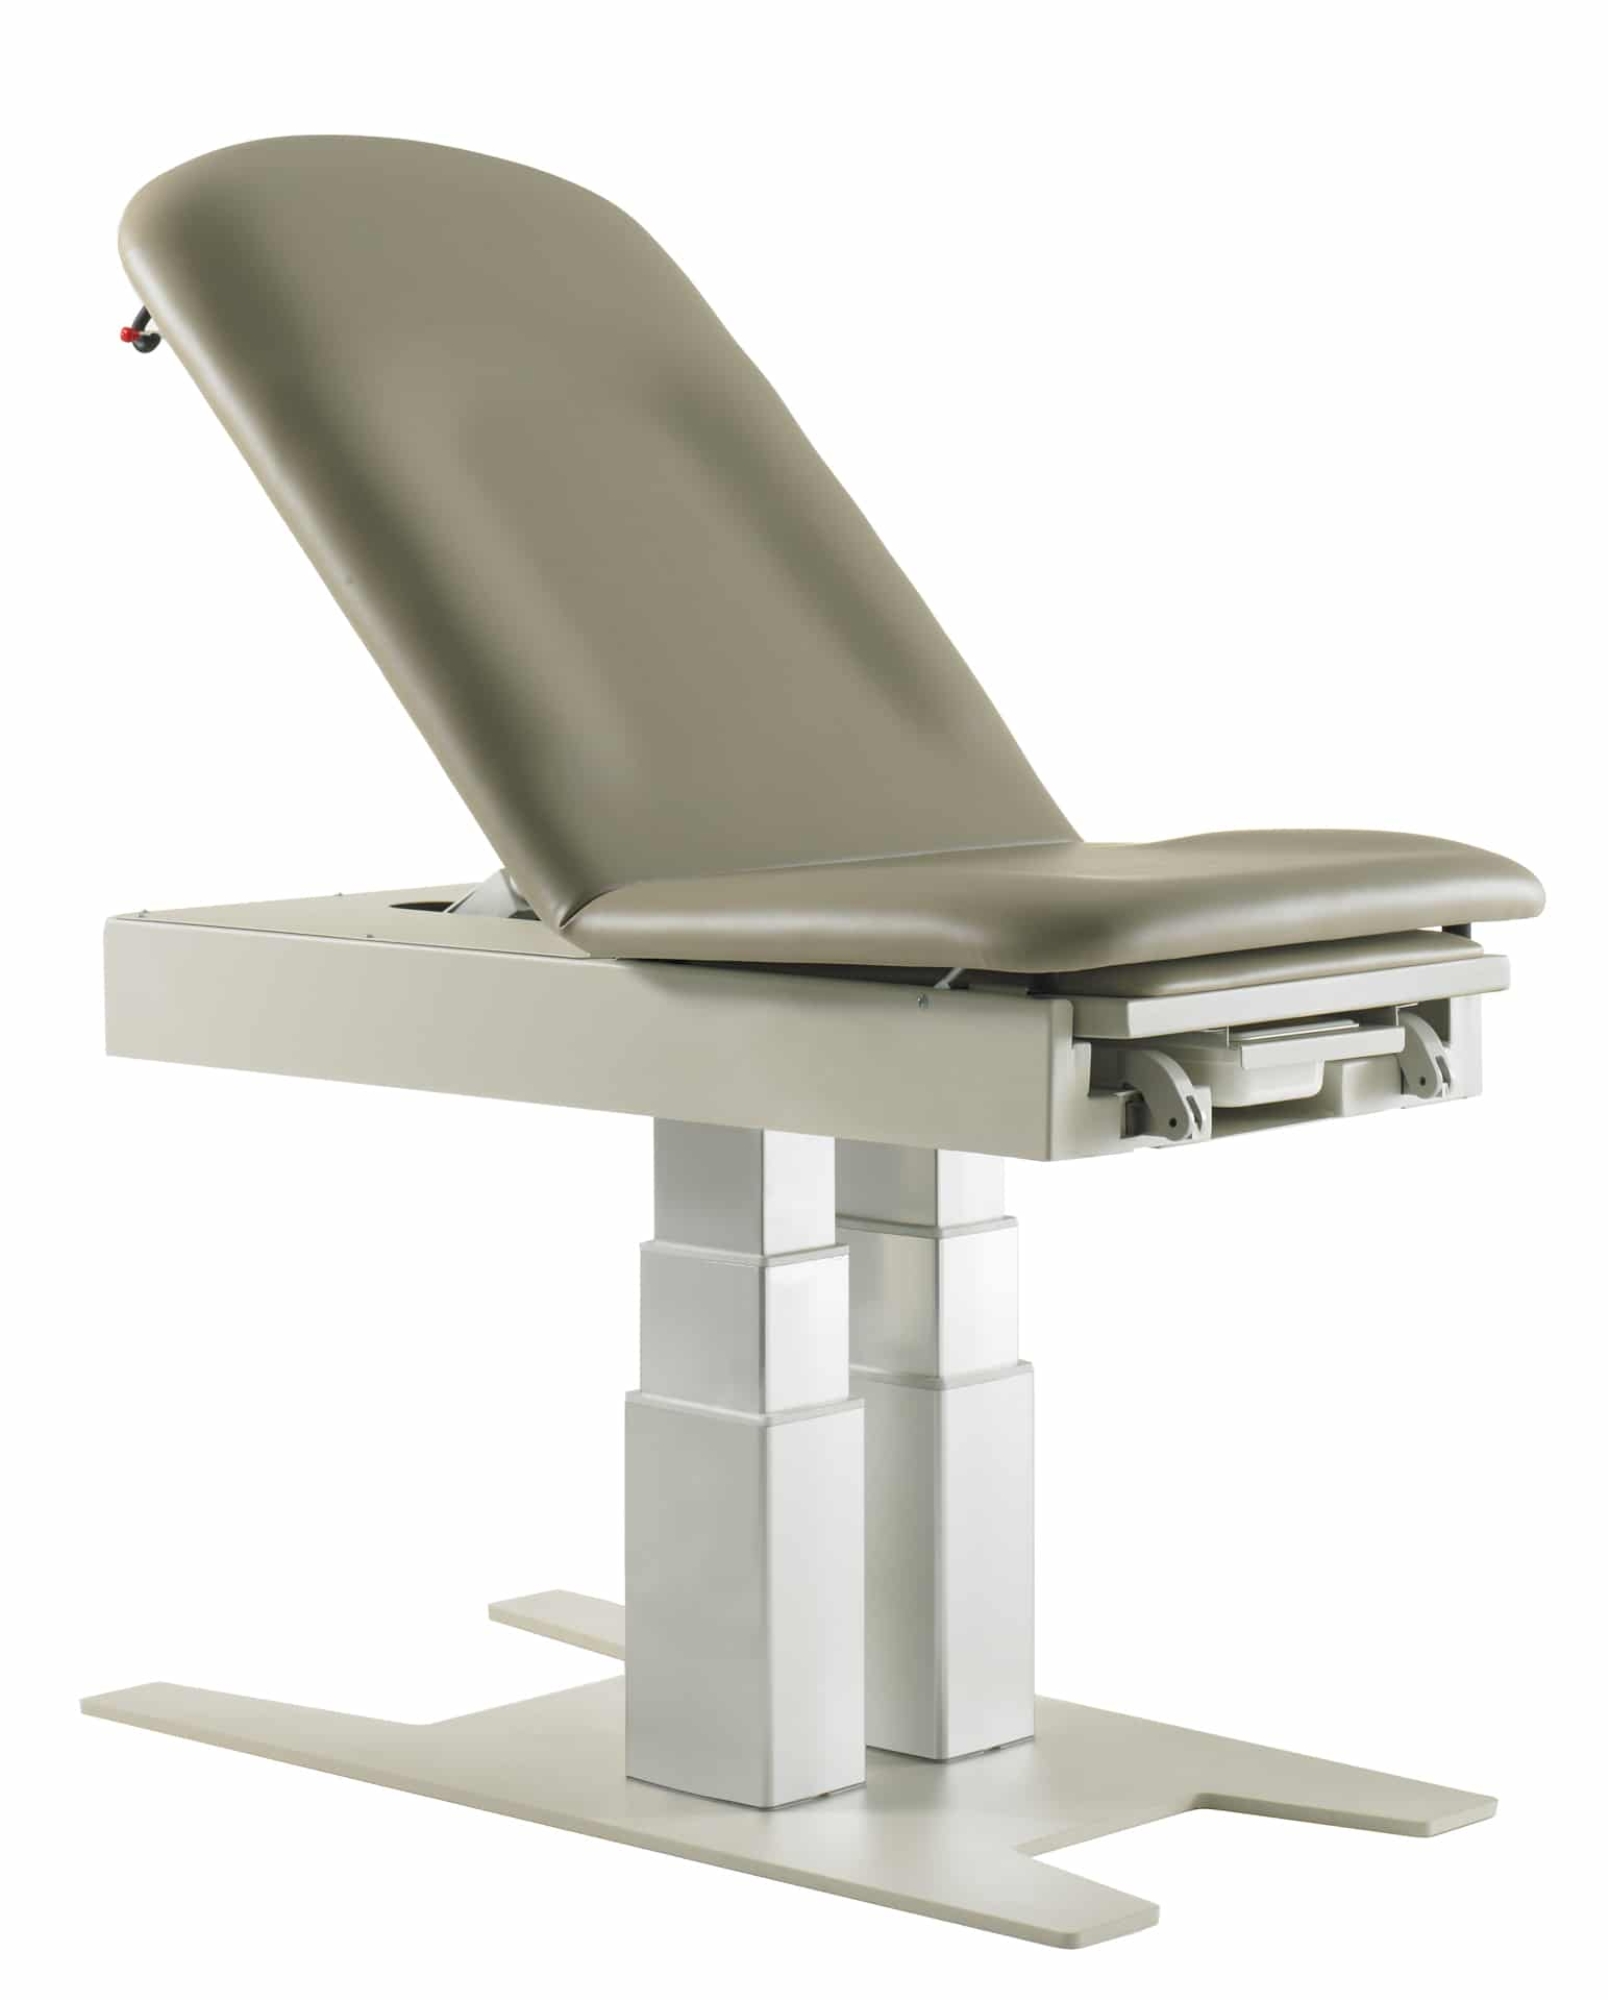 - Accessories Control, Hand Table: GF: Stirrups All Back, Assisted High/Low Power Power